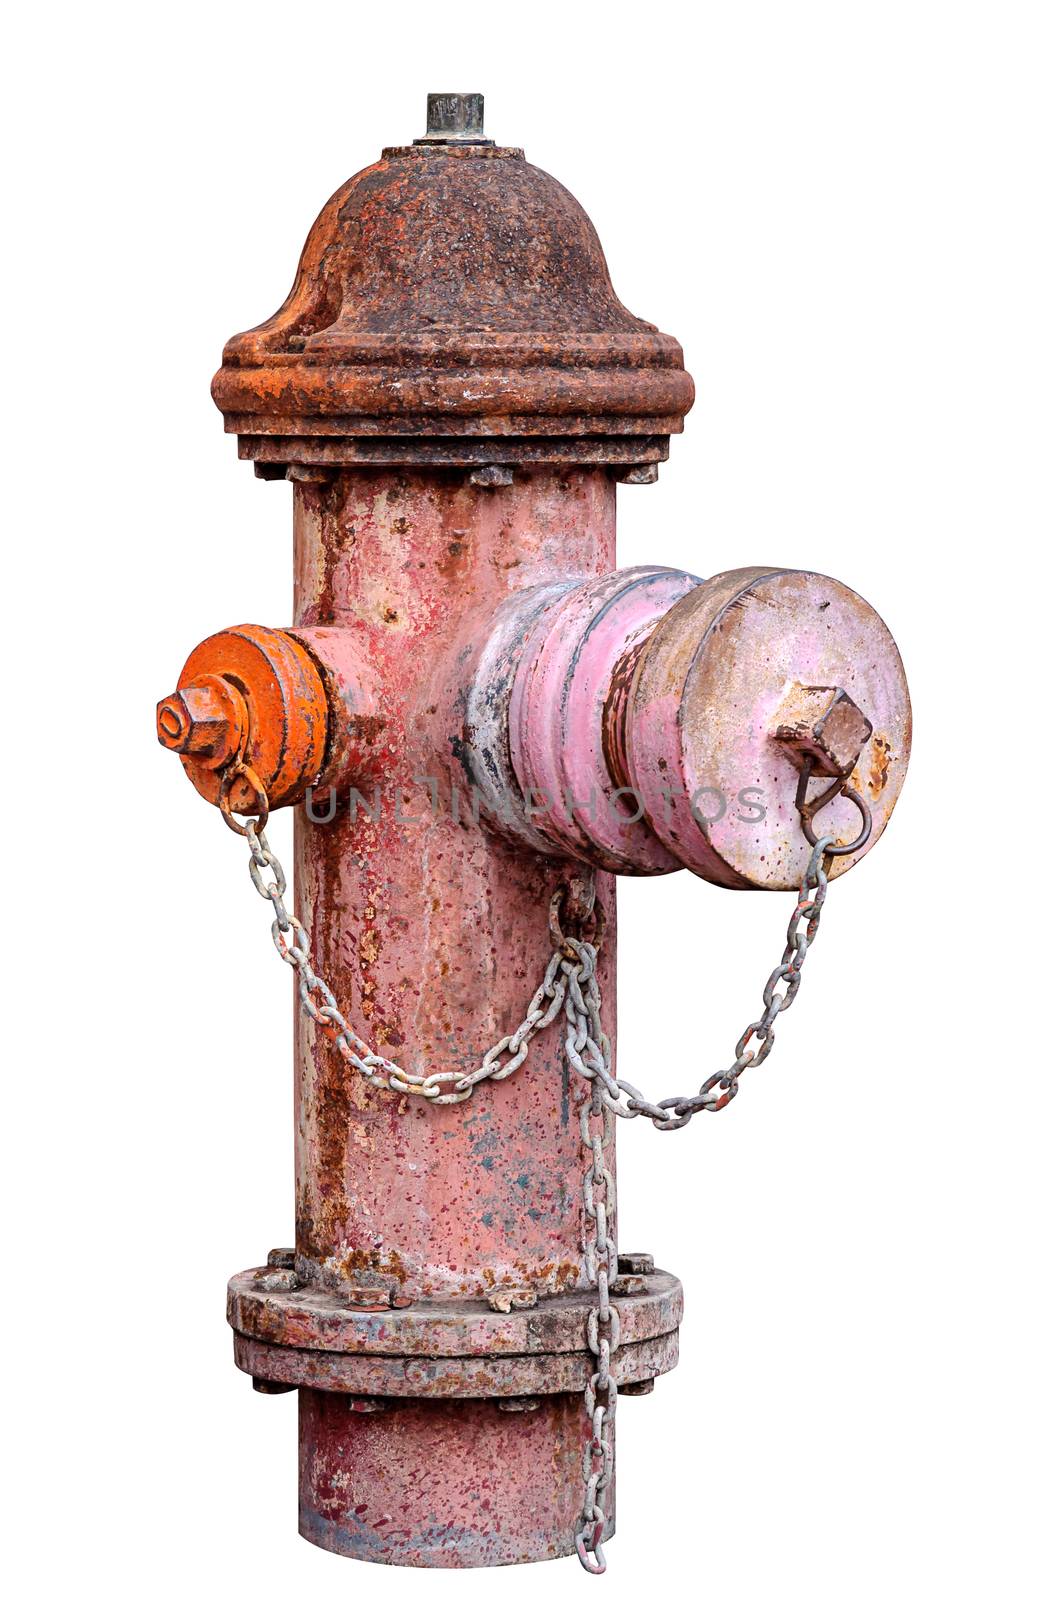 Old red fire hydrant isolated on white background